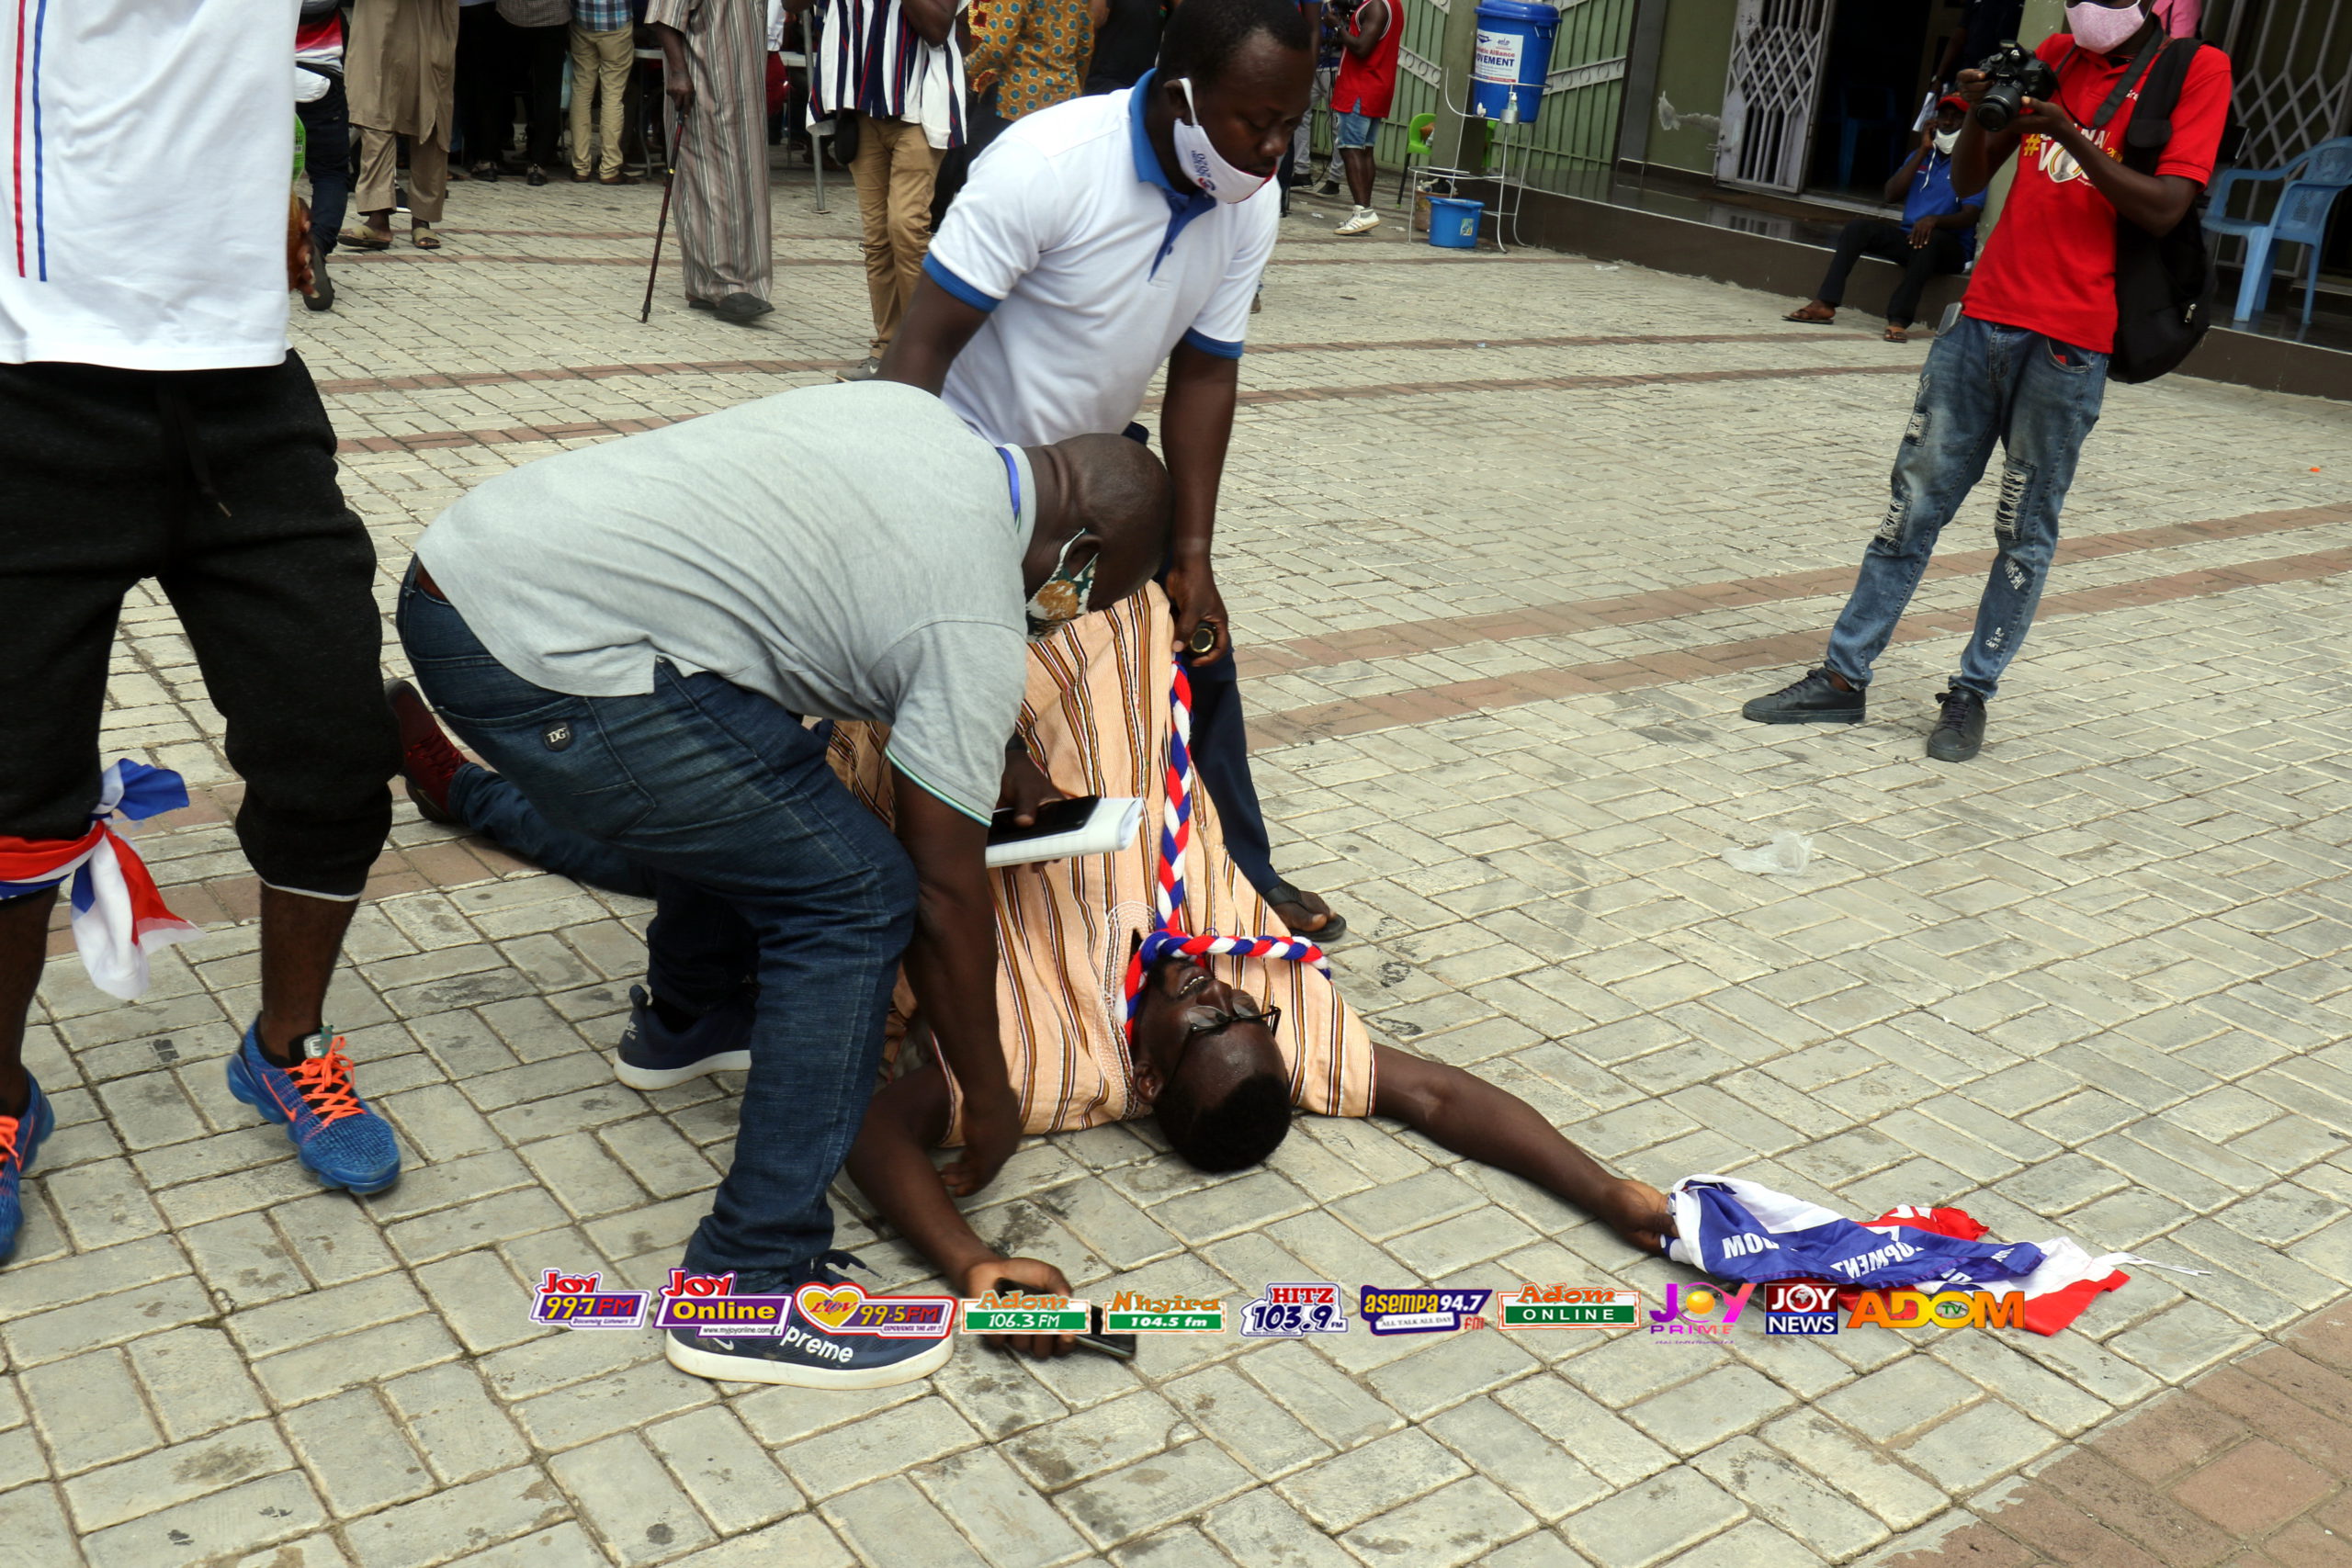 Interesting pictures: How candidates and supporters reacted to defeat and  victory in NPP primaries - Adomonline.com